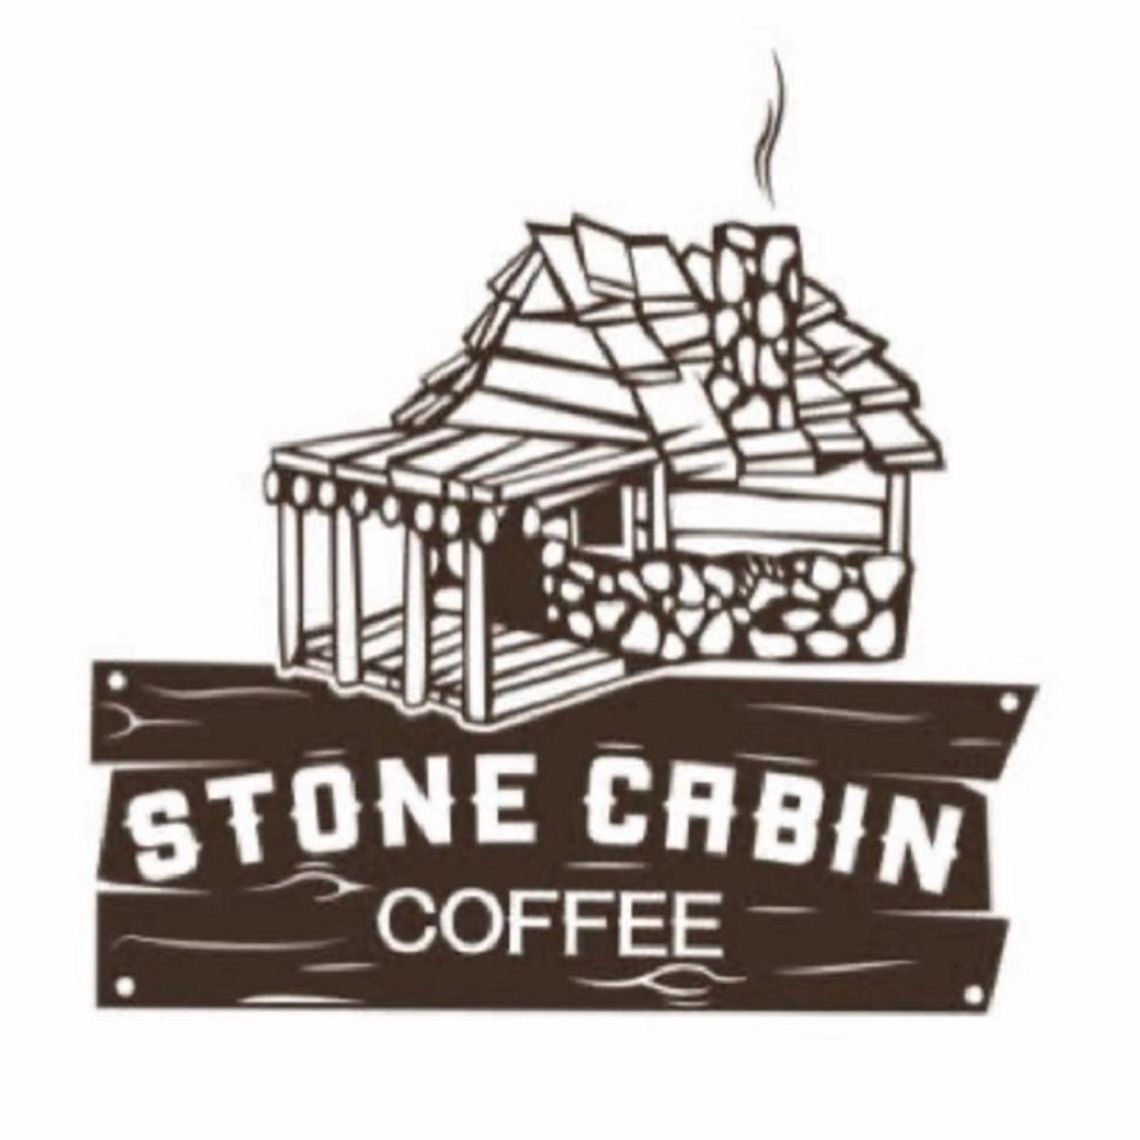 Stone Cabin Coffee Restaurant Review